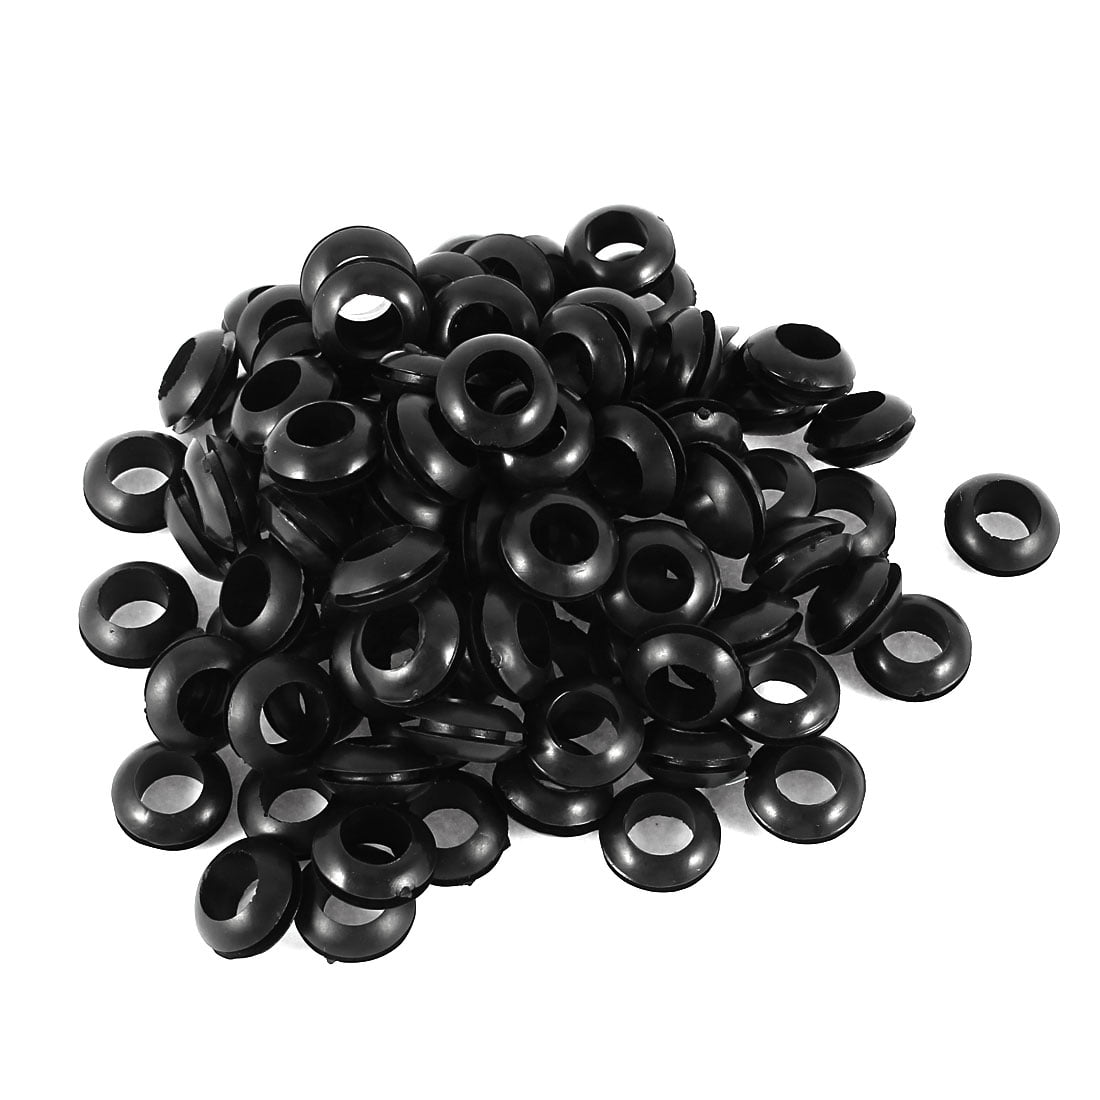 100Pcs Double Sided Armature Wire Rubber Grommets Ring Black 6mm x 12mm ...